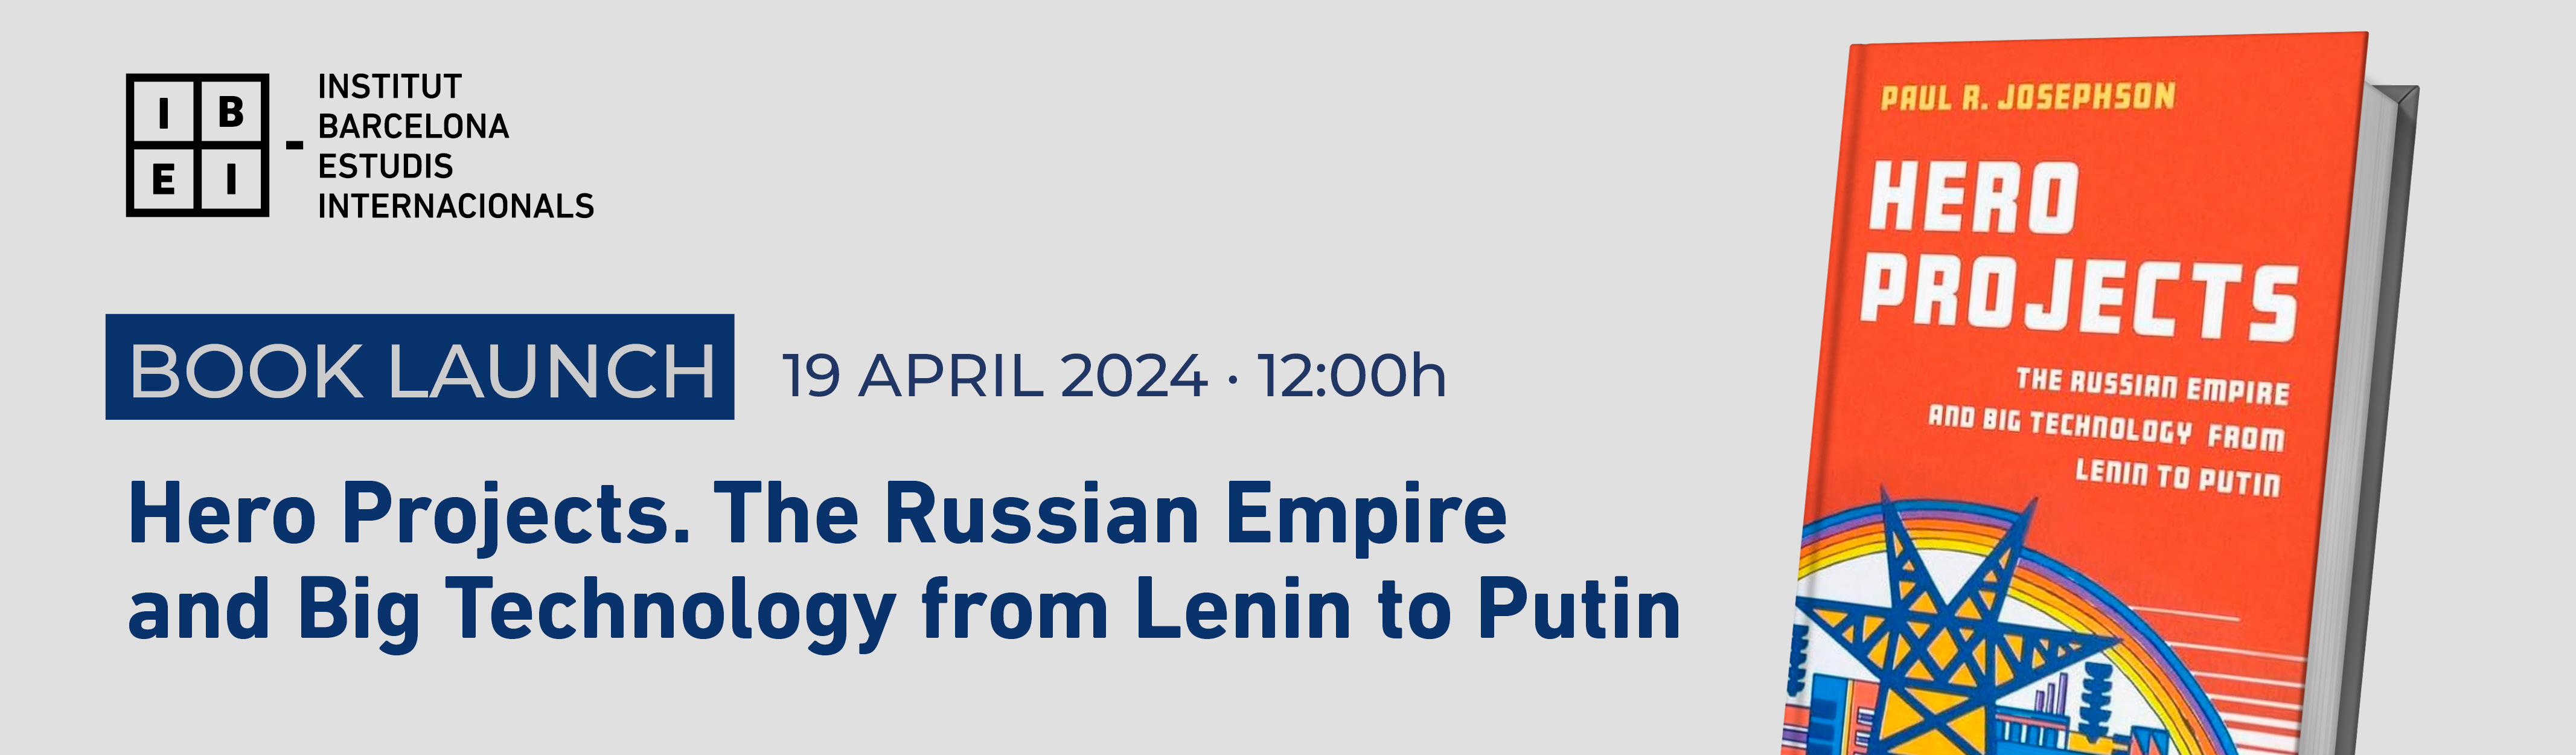 Hero Projects. The Russian Empire and Big Technology from Lenin to Putin